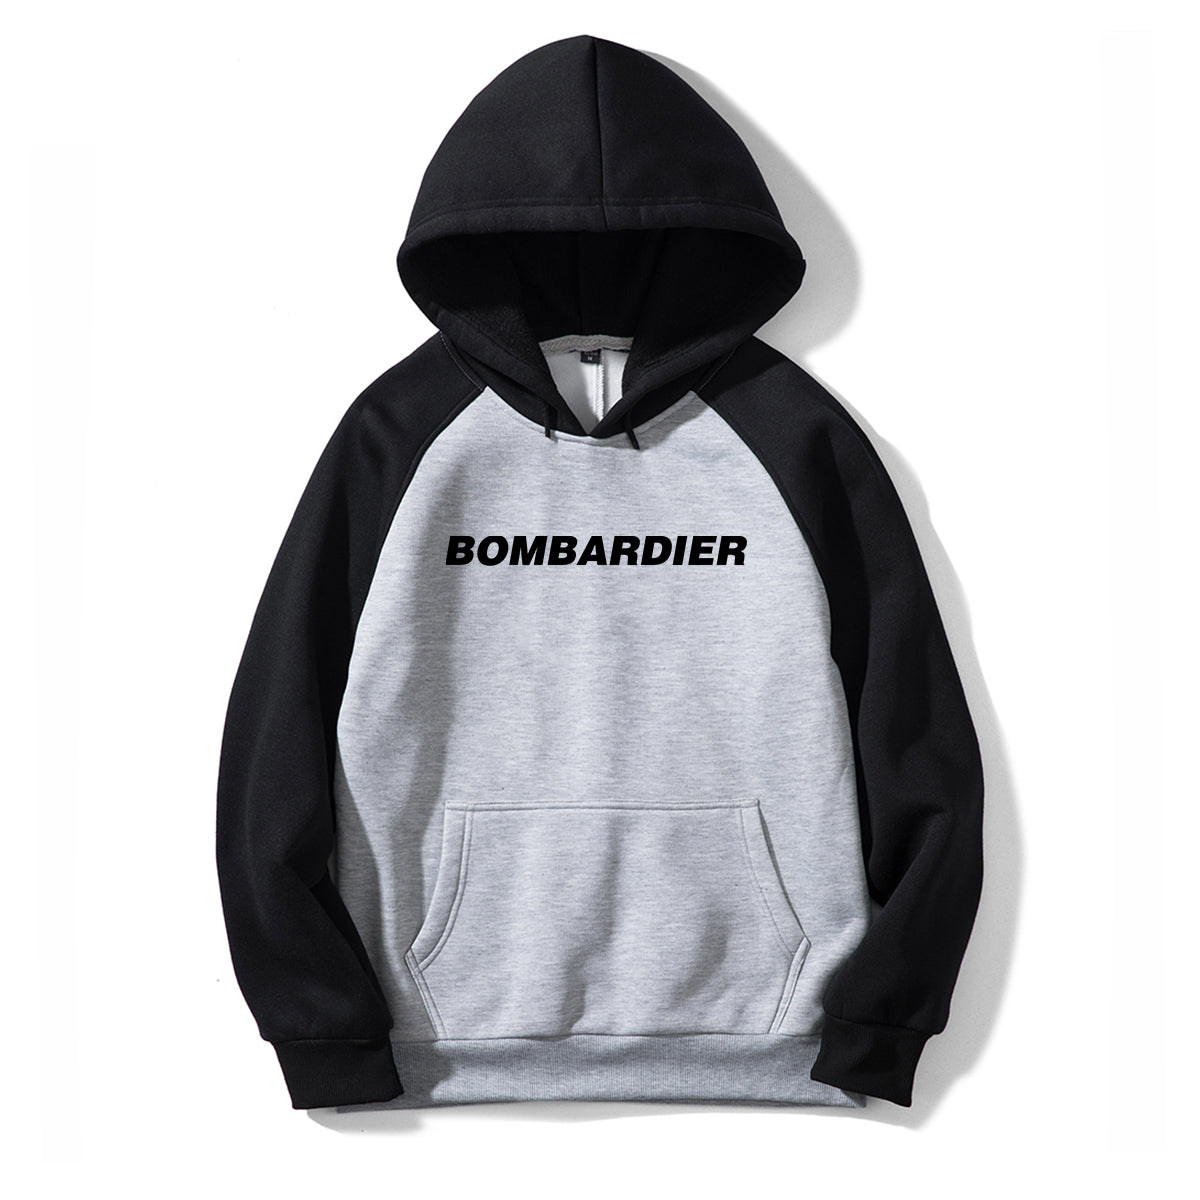 Bombardier & Text Designed Colourful Hoodies